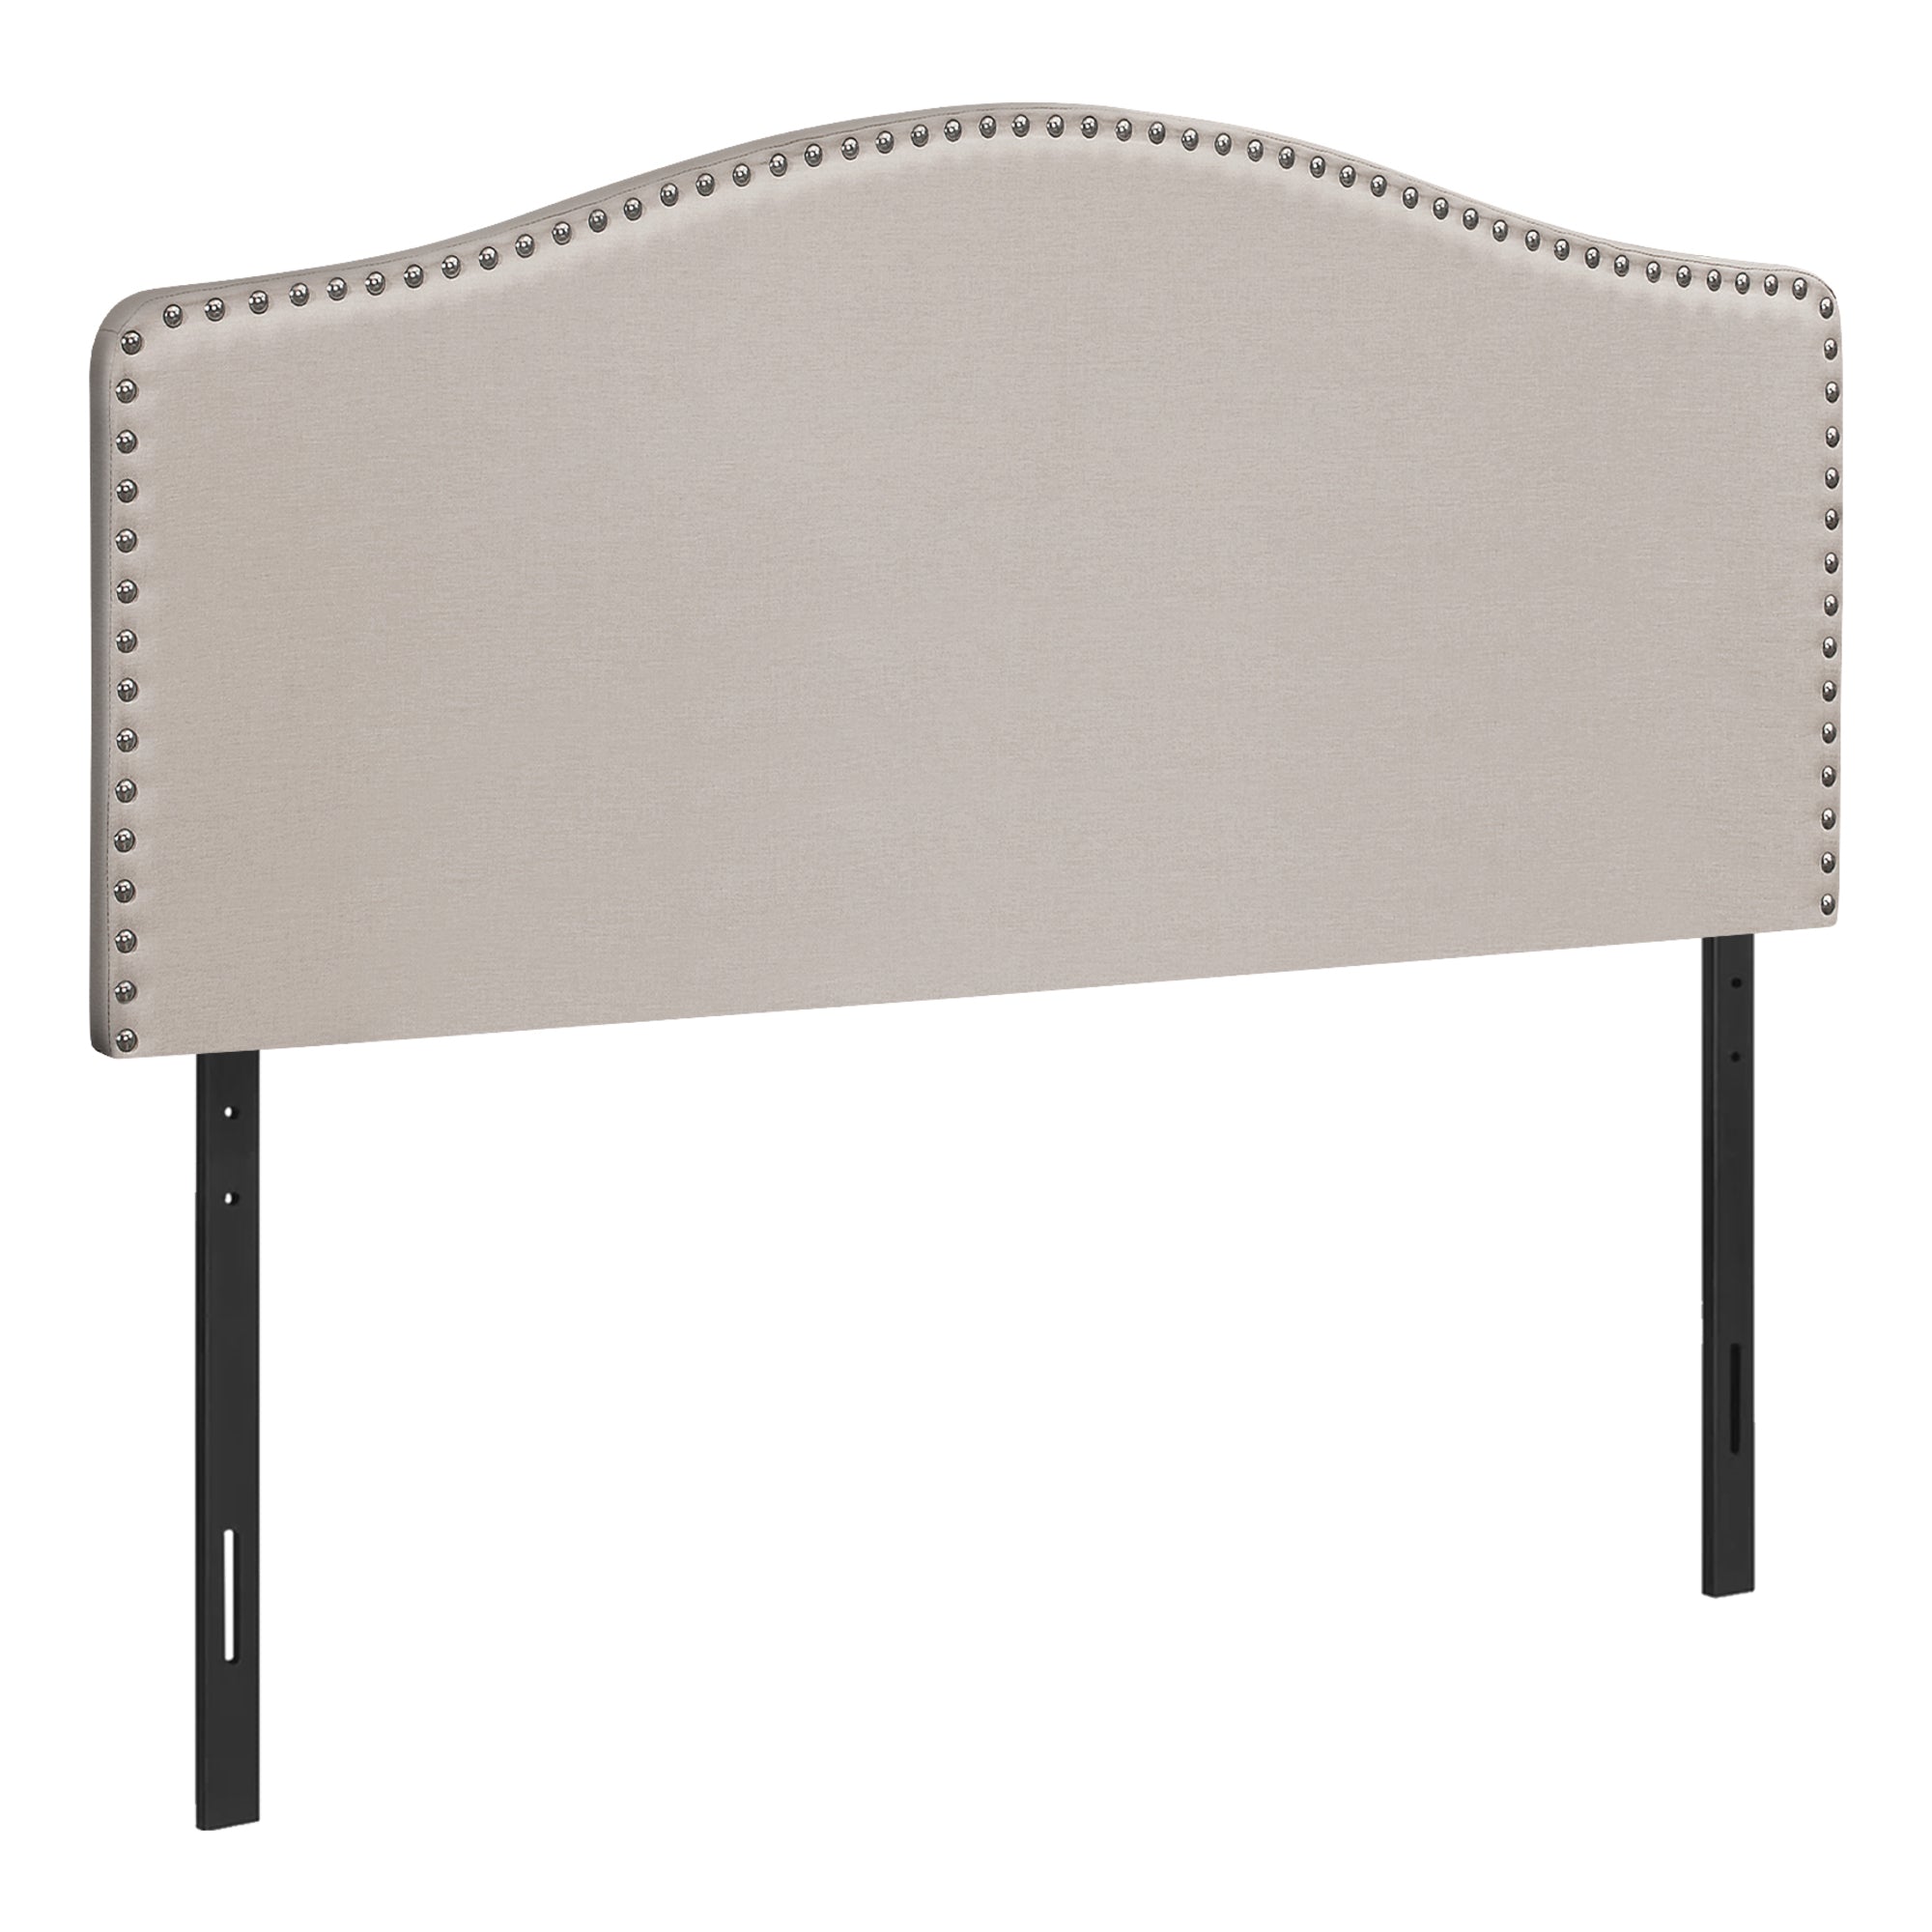 MN-586014Q    Headboard, Bedroom, Queen Size, Upholstered, Leather Look, Wooden Frame, Beige, Black, Contemporary, Modern